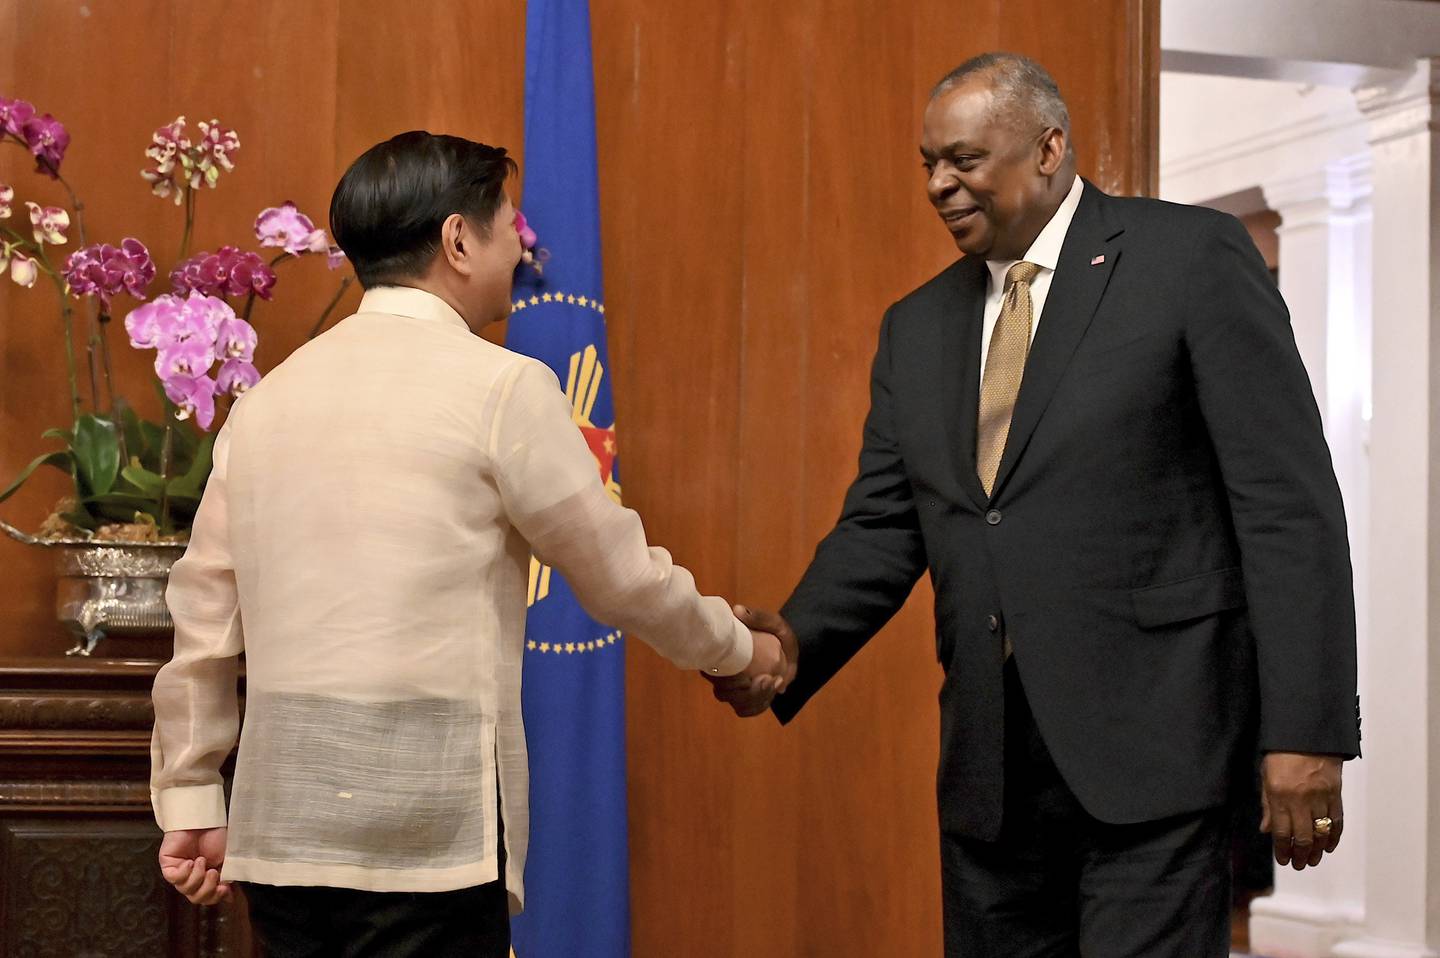 U.S. Secretary of Defense Lloyd James Austin III, right, shake hands with Philippine President Ferdinand Marcos Jr. during a courtesy call at the Malacanang Palace in Manila, Philippines on Thursday, Feb. 2, 2023.